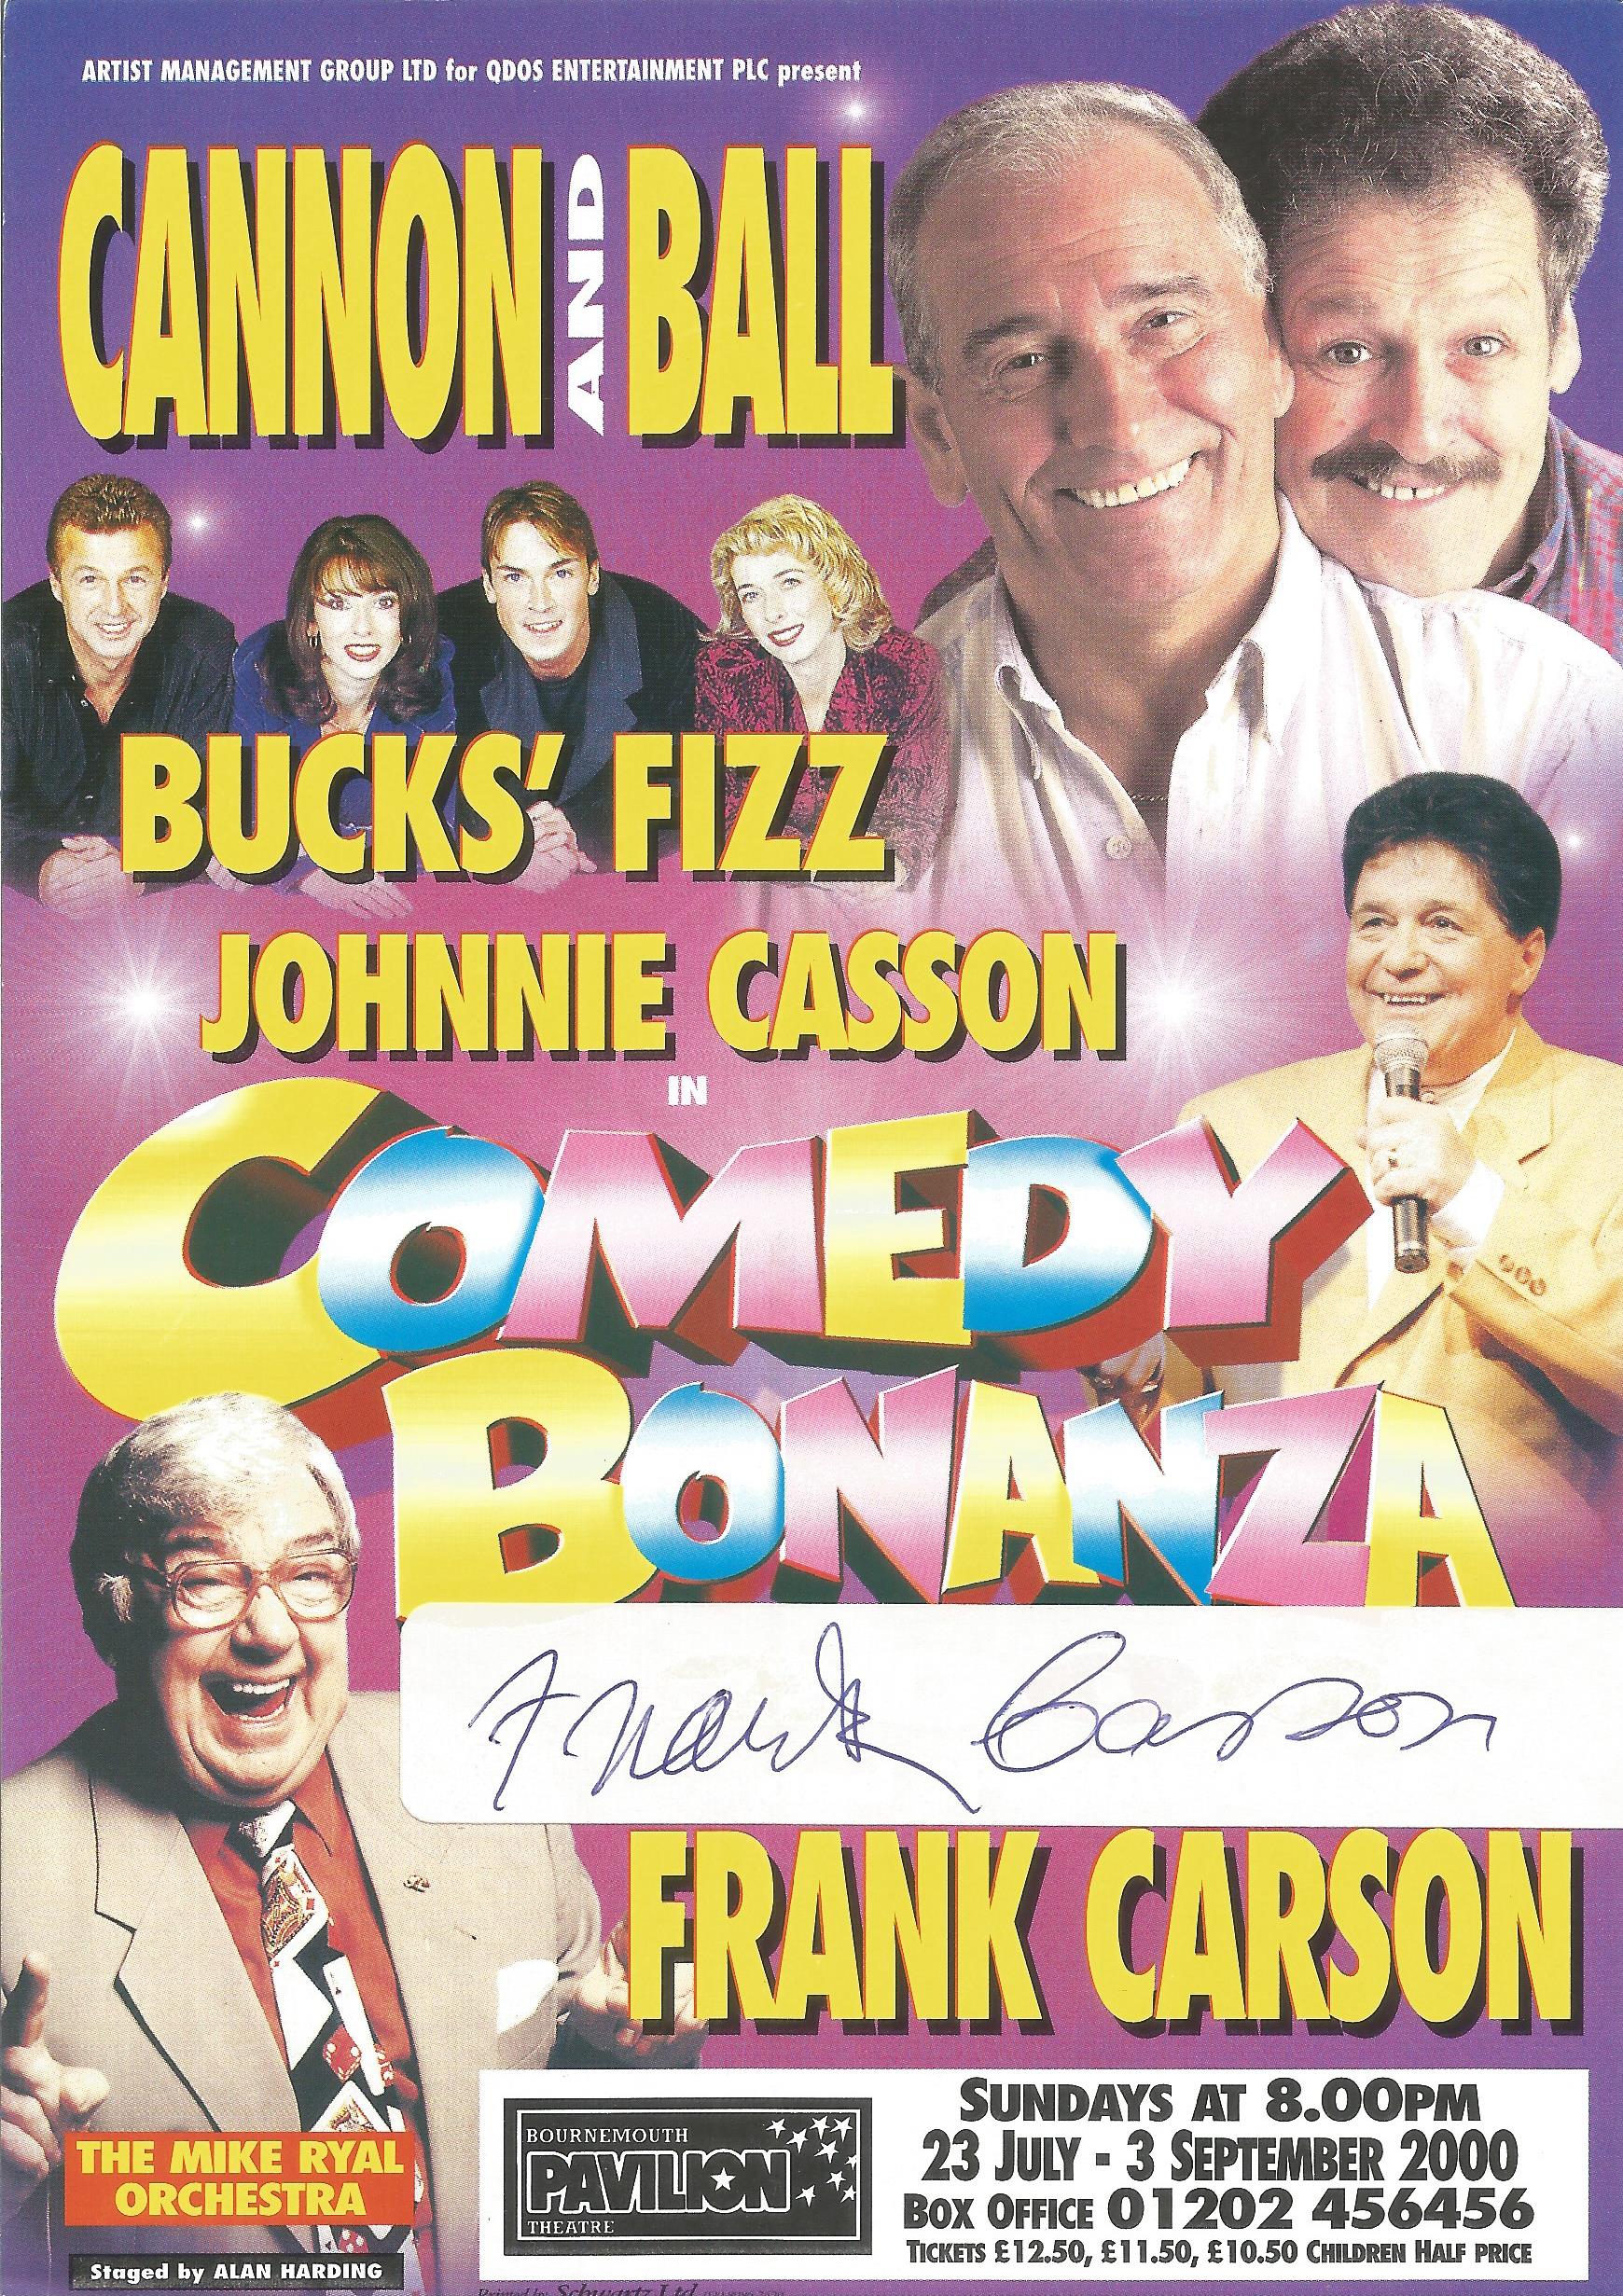 Frank Carson signed comedy evening flyer from Bournemouth, 2000. Carson was a Northern Irish - Image 2 of 2